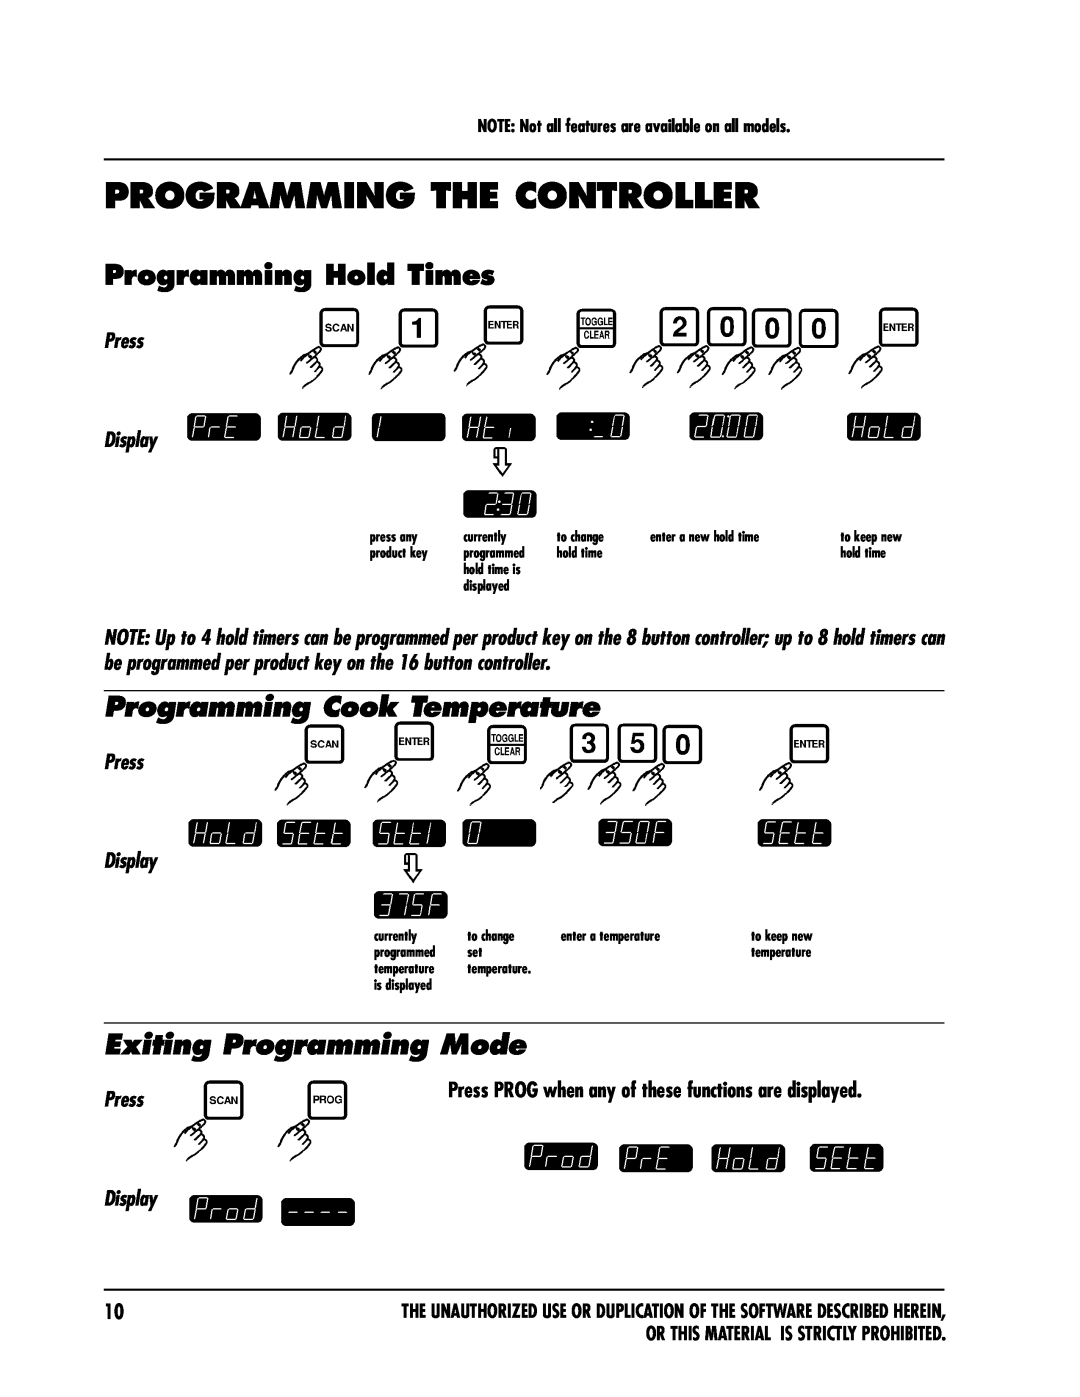 Keating Of Chicago IM-2000 Programming Hold Times, Programming Cook Temperature, Exiting Programming Mode, Press, Display 